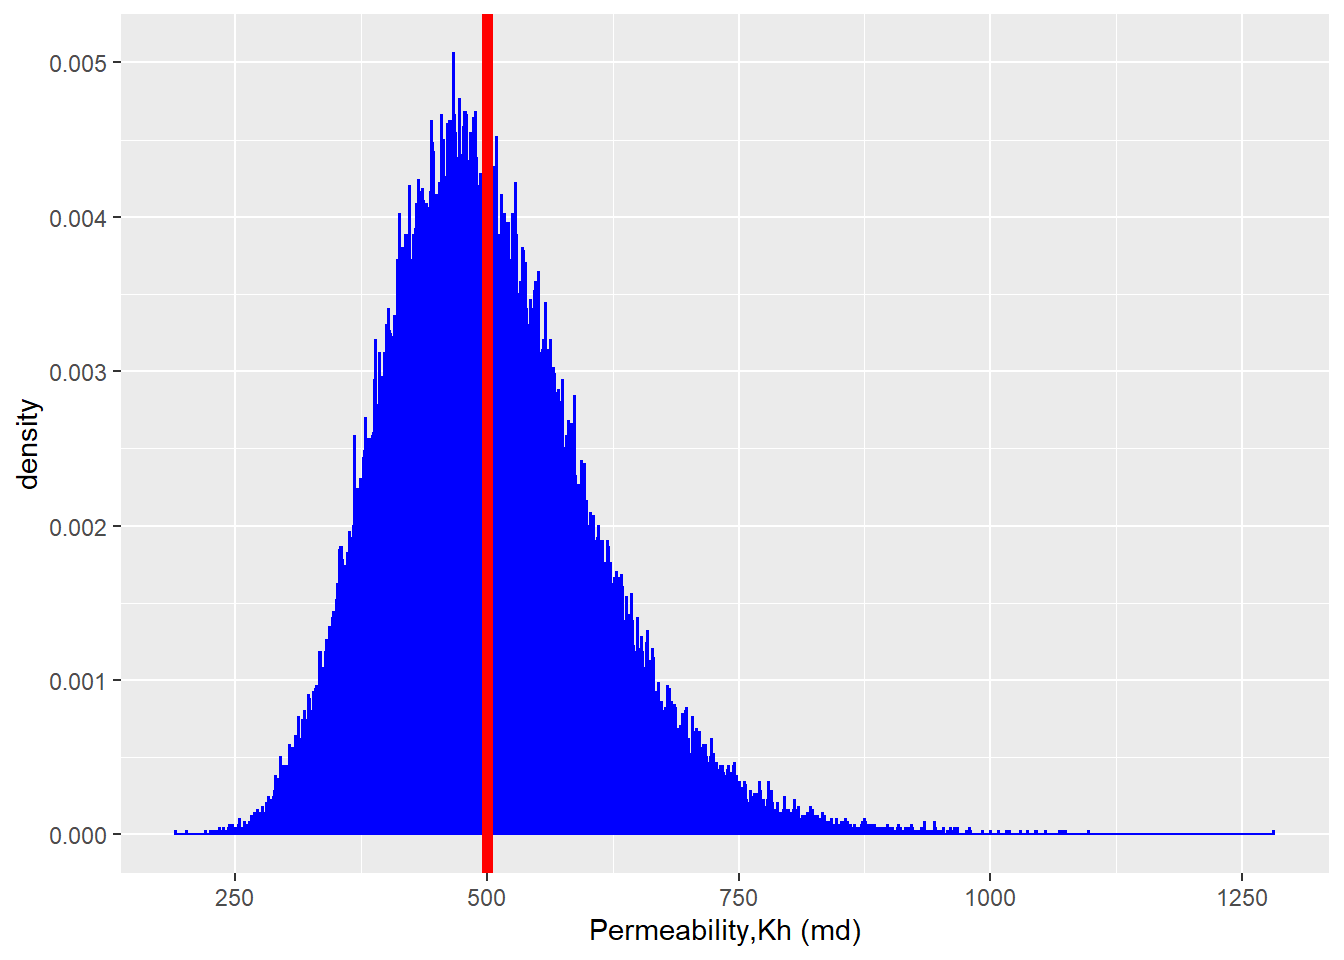  Log-Normal Distribution of the Field Permeability